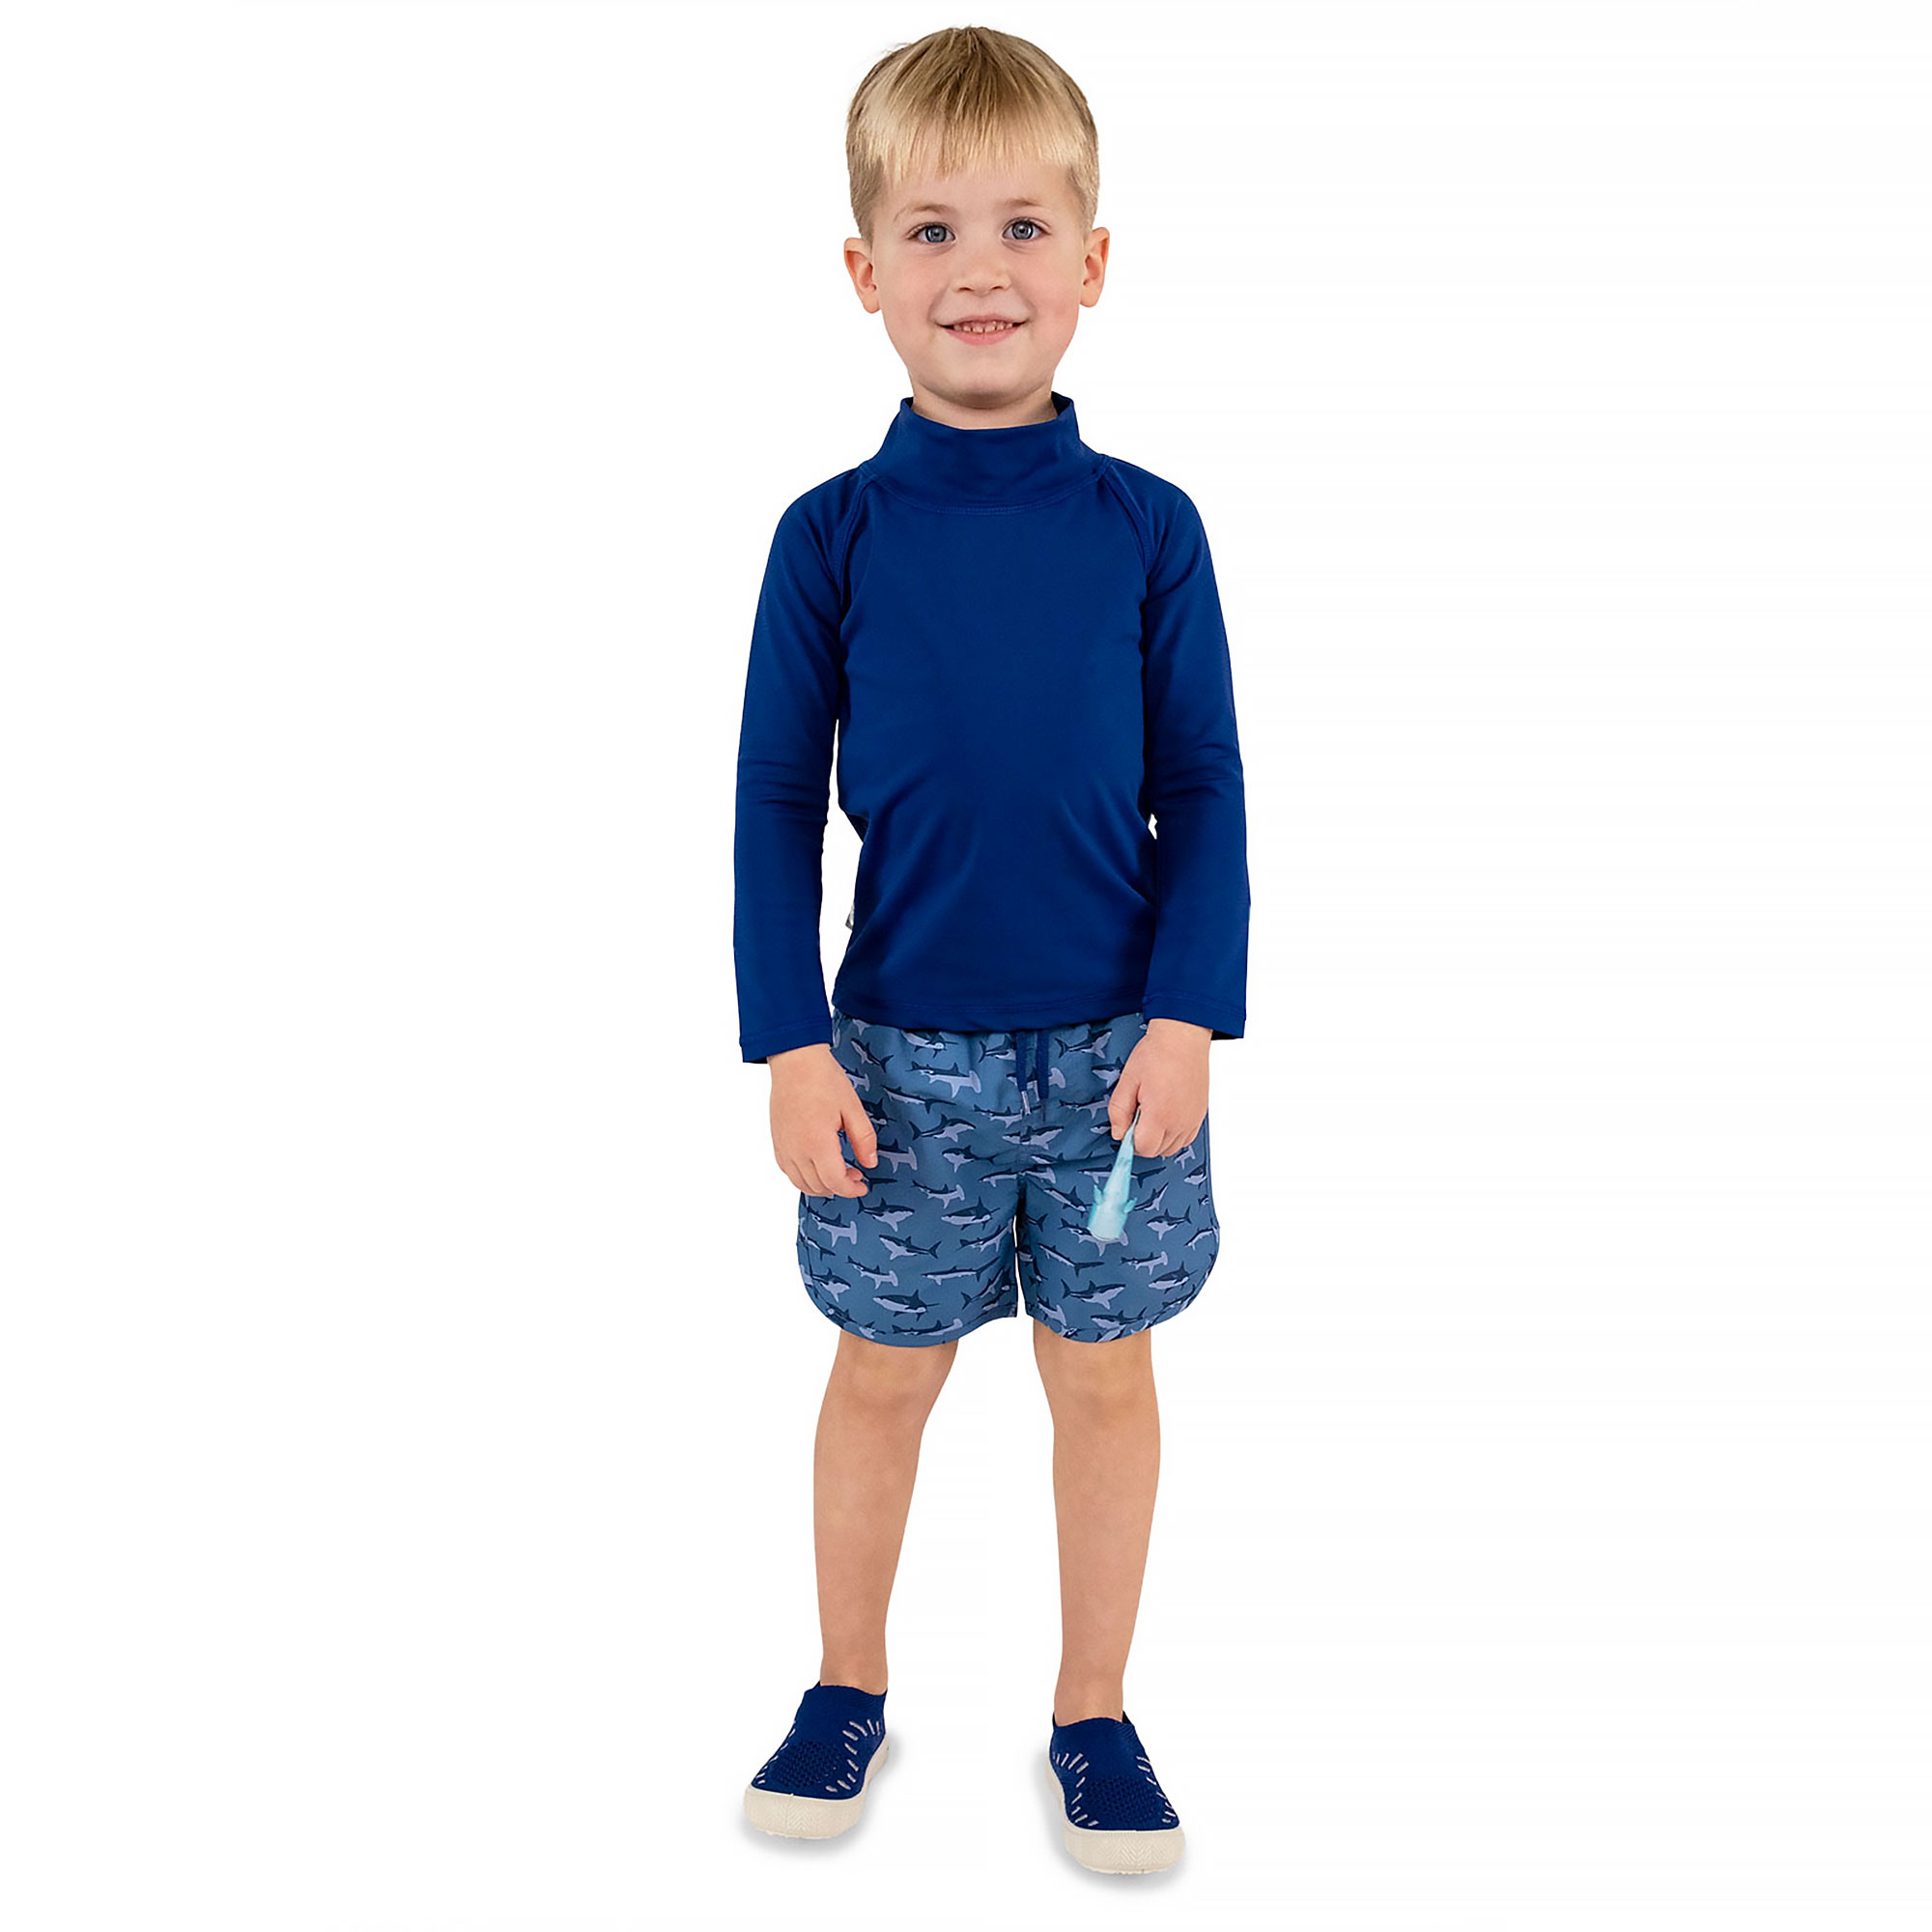  Idgreatim Little Boys Smoke Swim Trunks 6 Years Kids Quick Dry  Beach Shorts with Pockets Elastic Waist Drawstring Bathing Suit with Mesh  6-7 Years: Clothing, Shoes & Jewelry